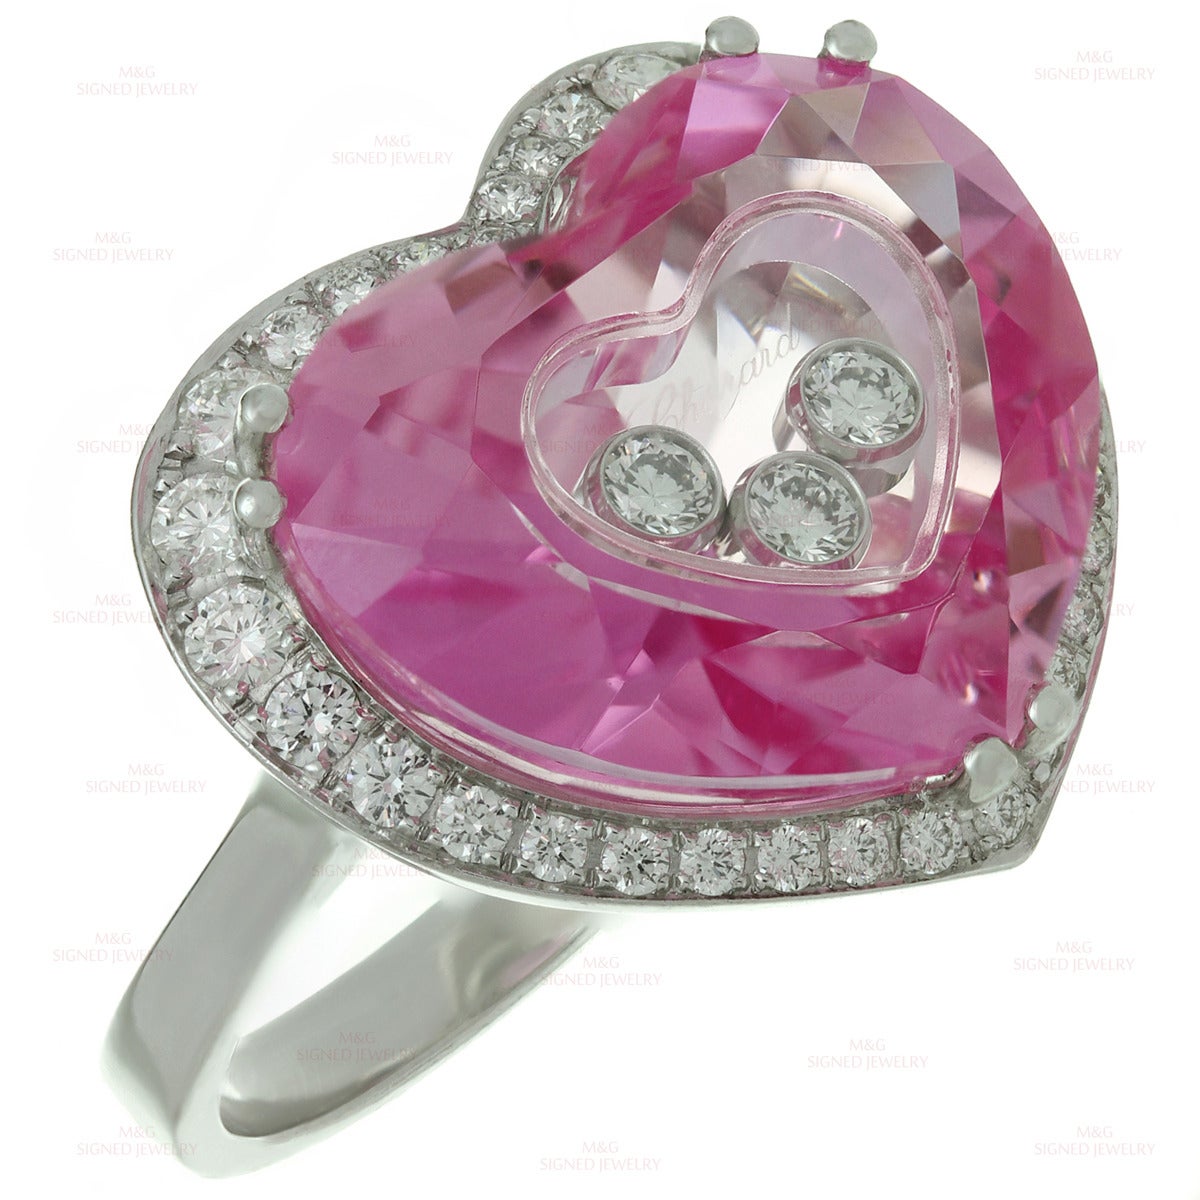 This romantic Chopard ring from the Happy Diamonds collection is made in 18k white gold and features a bright sparkling faceted heart-shaped pink quartz beautifully accented with 3 free-floating bezel-set F-G VVS2-VS1 diamonds and pave- set diamonds